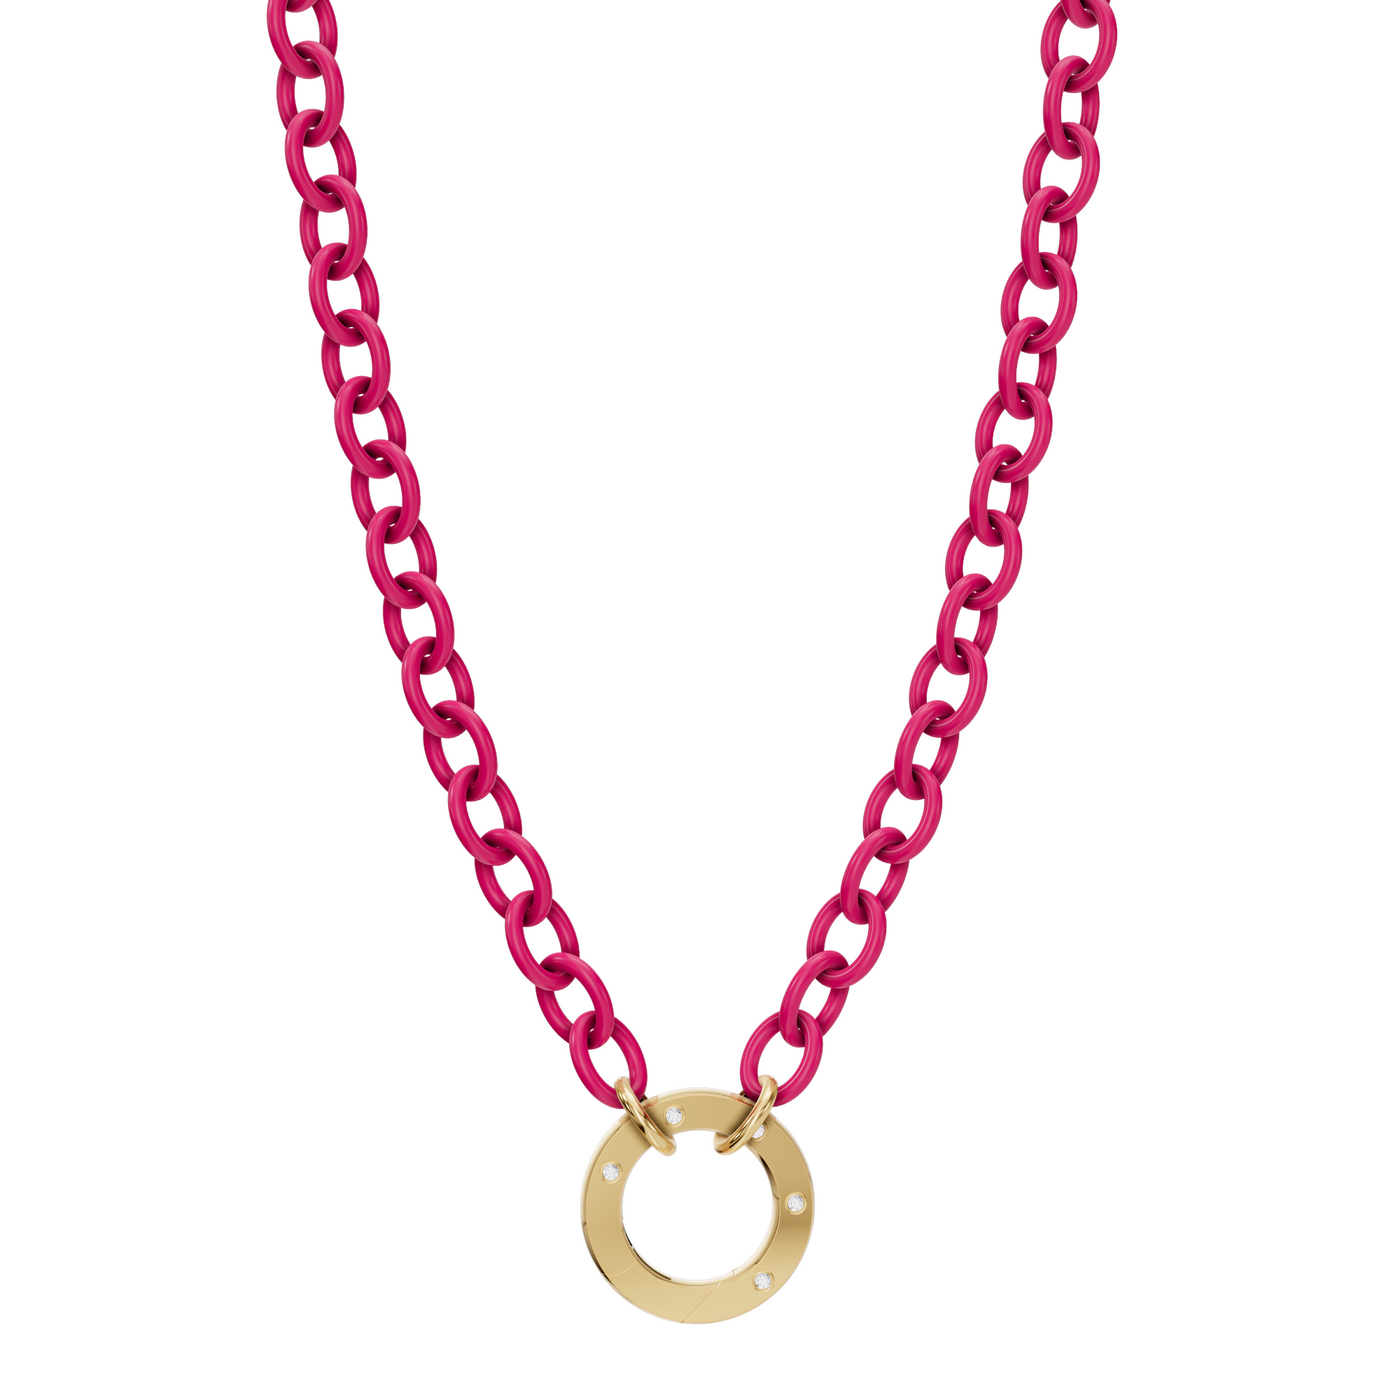 3.8mm Stainless Steel Rubellite Pink Hinge Chain